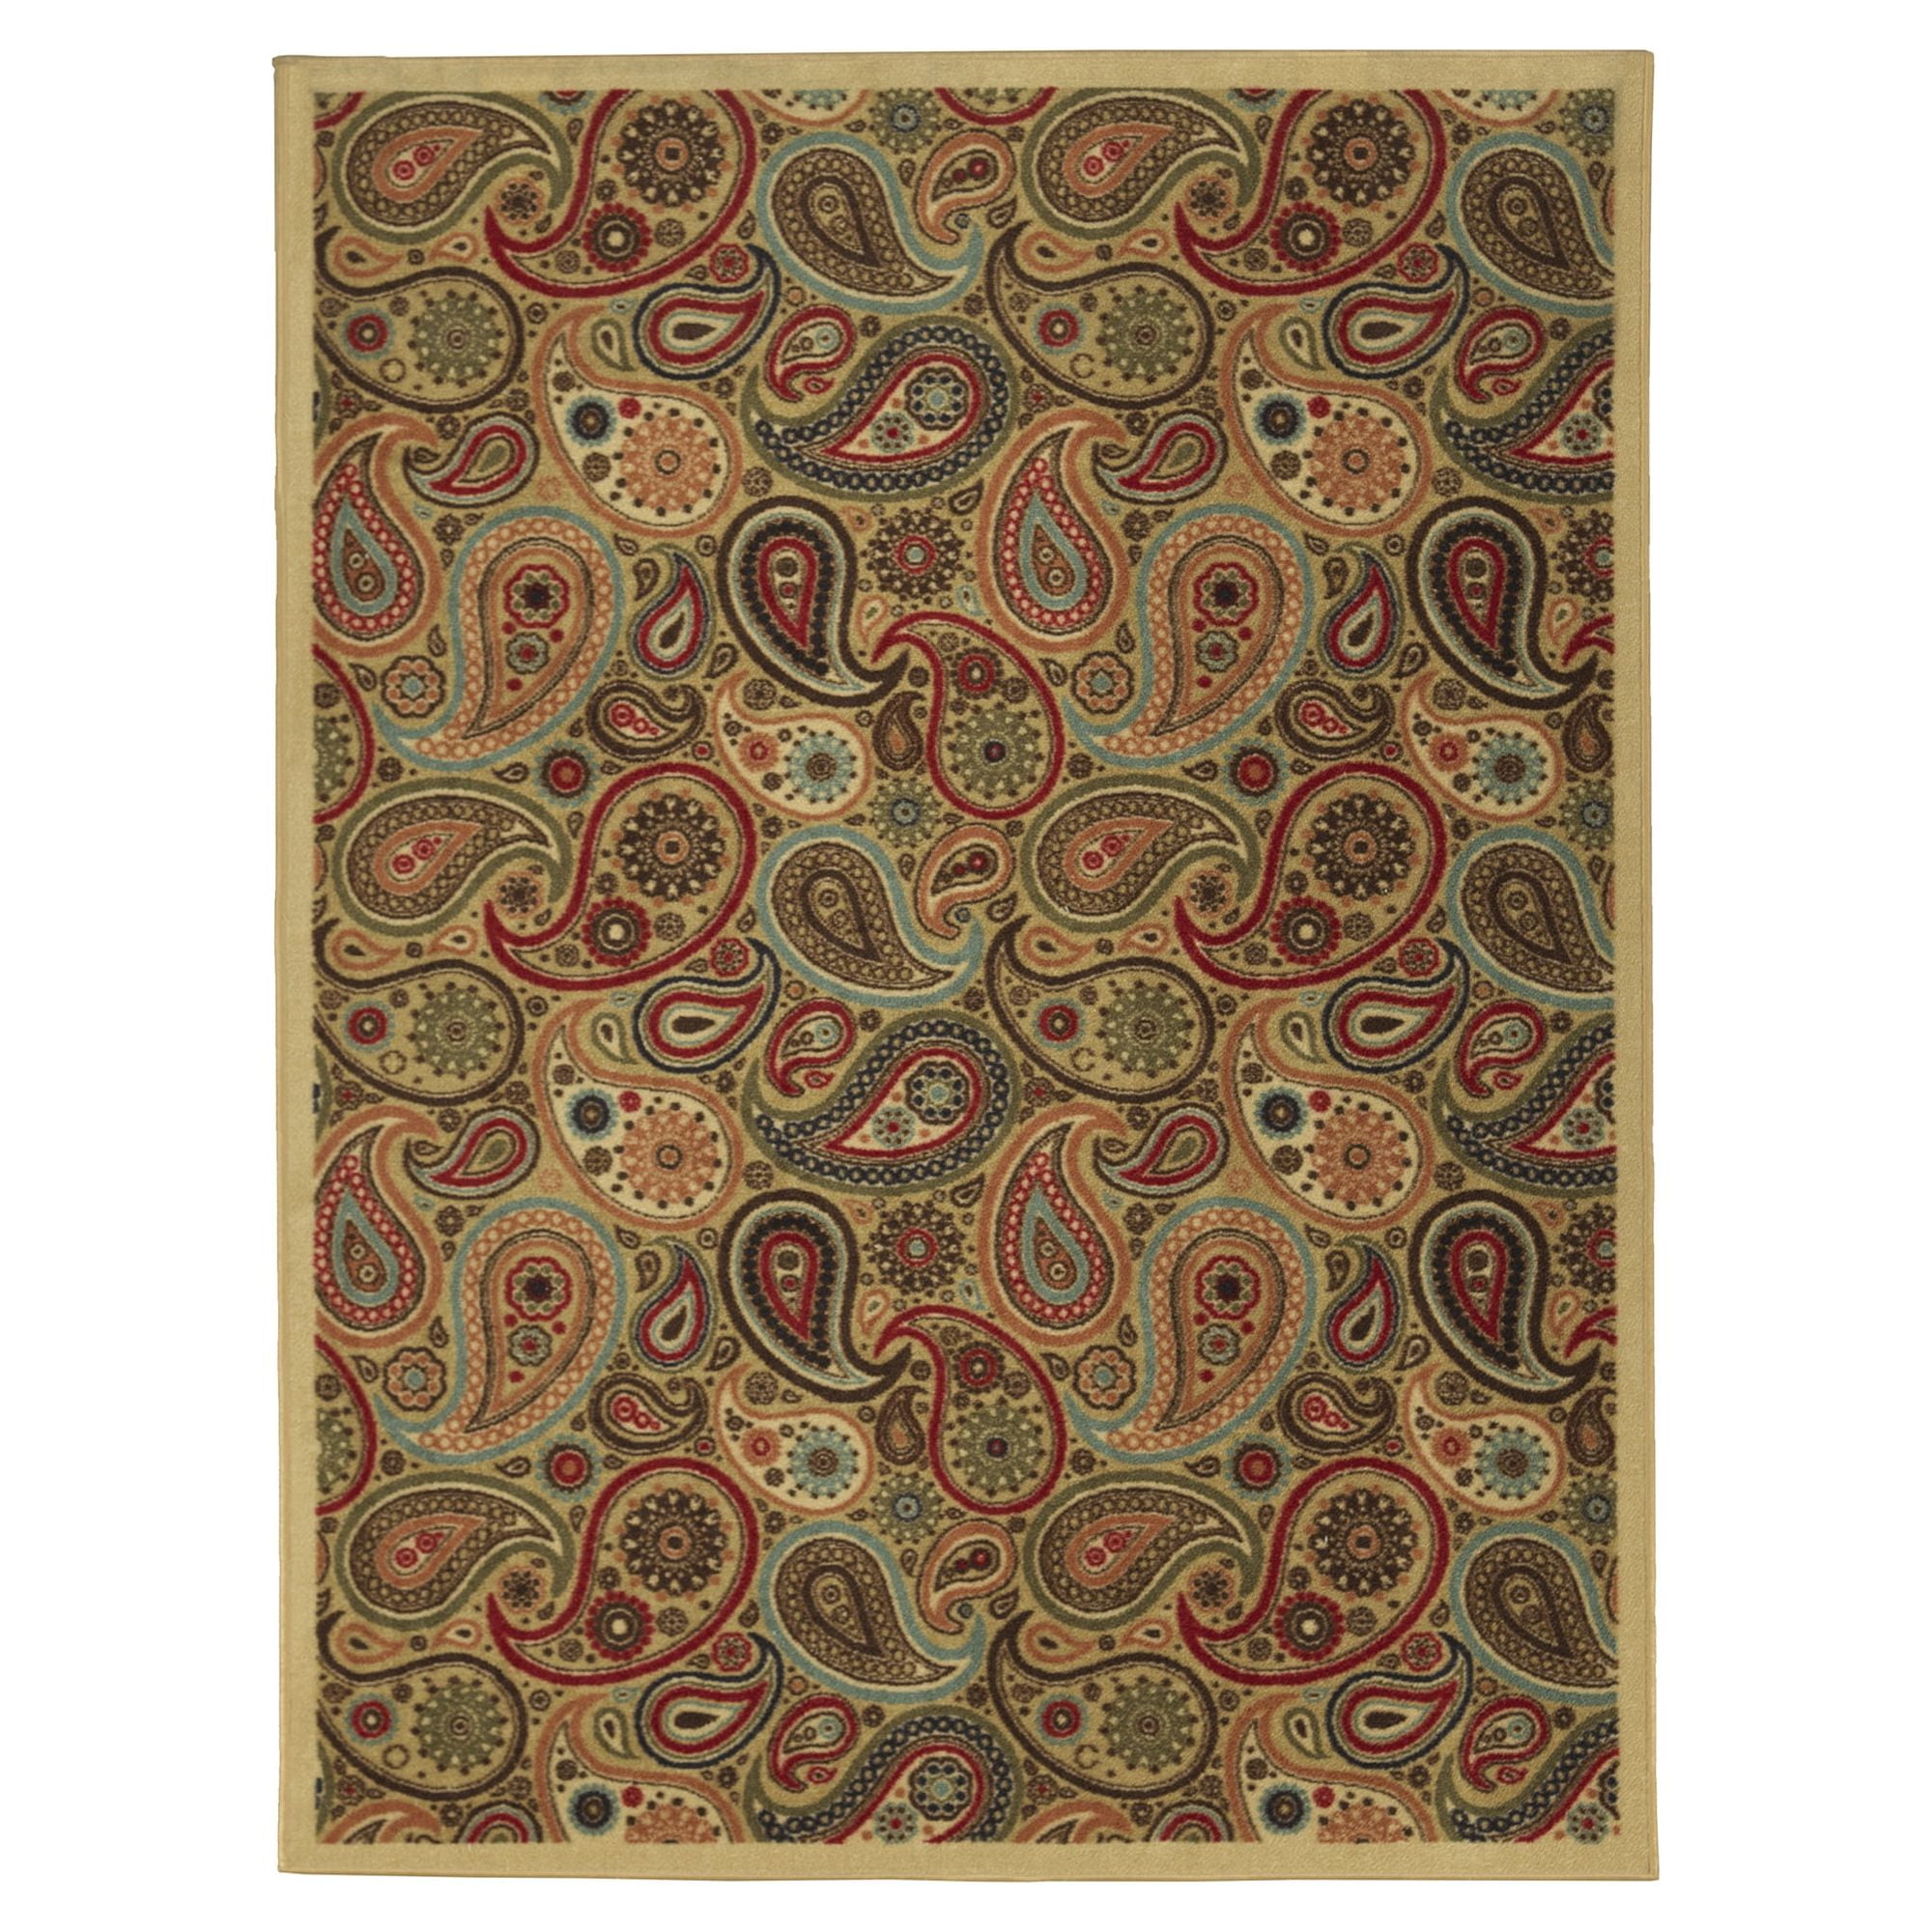 Rubber Backed Area Rug, 39 X 58 inch (fits 3x5 Area), Beige Geometric, Non  Slip, Kitchen Rugs and Mats